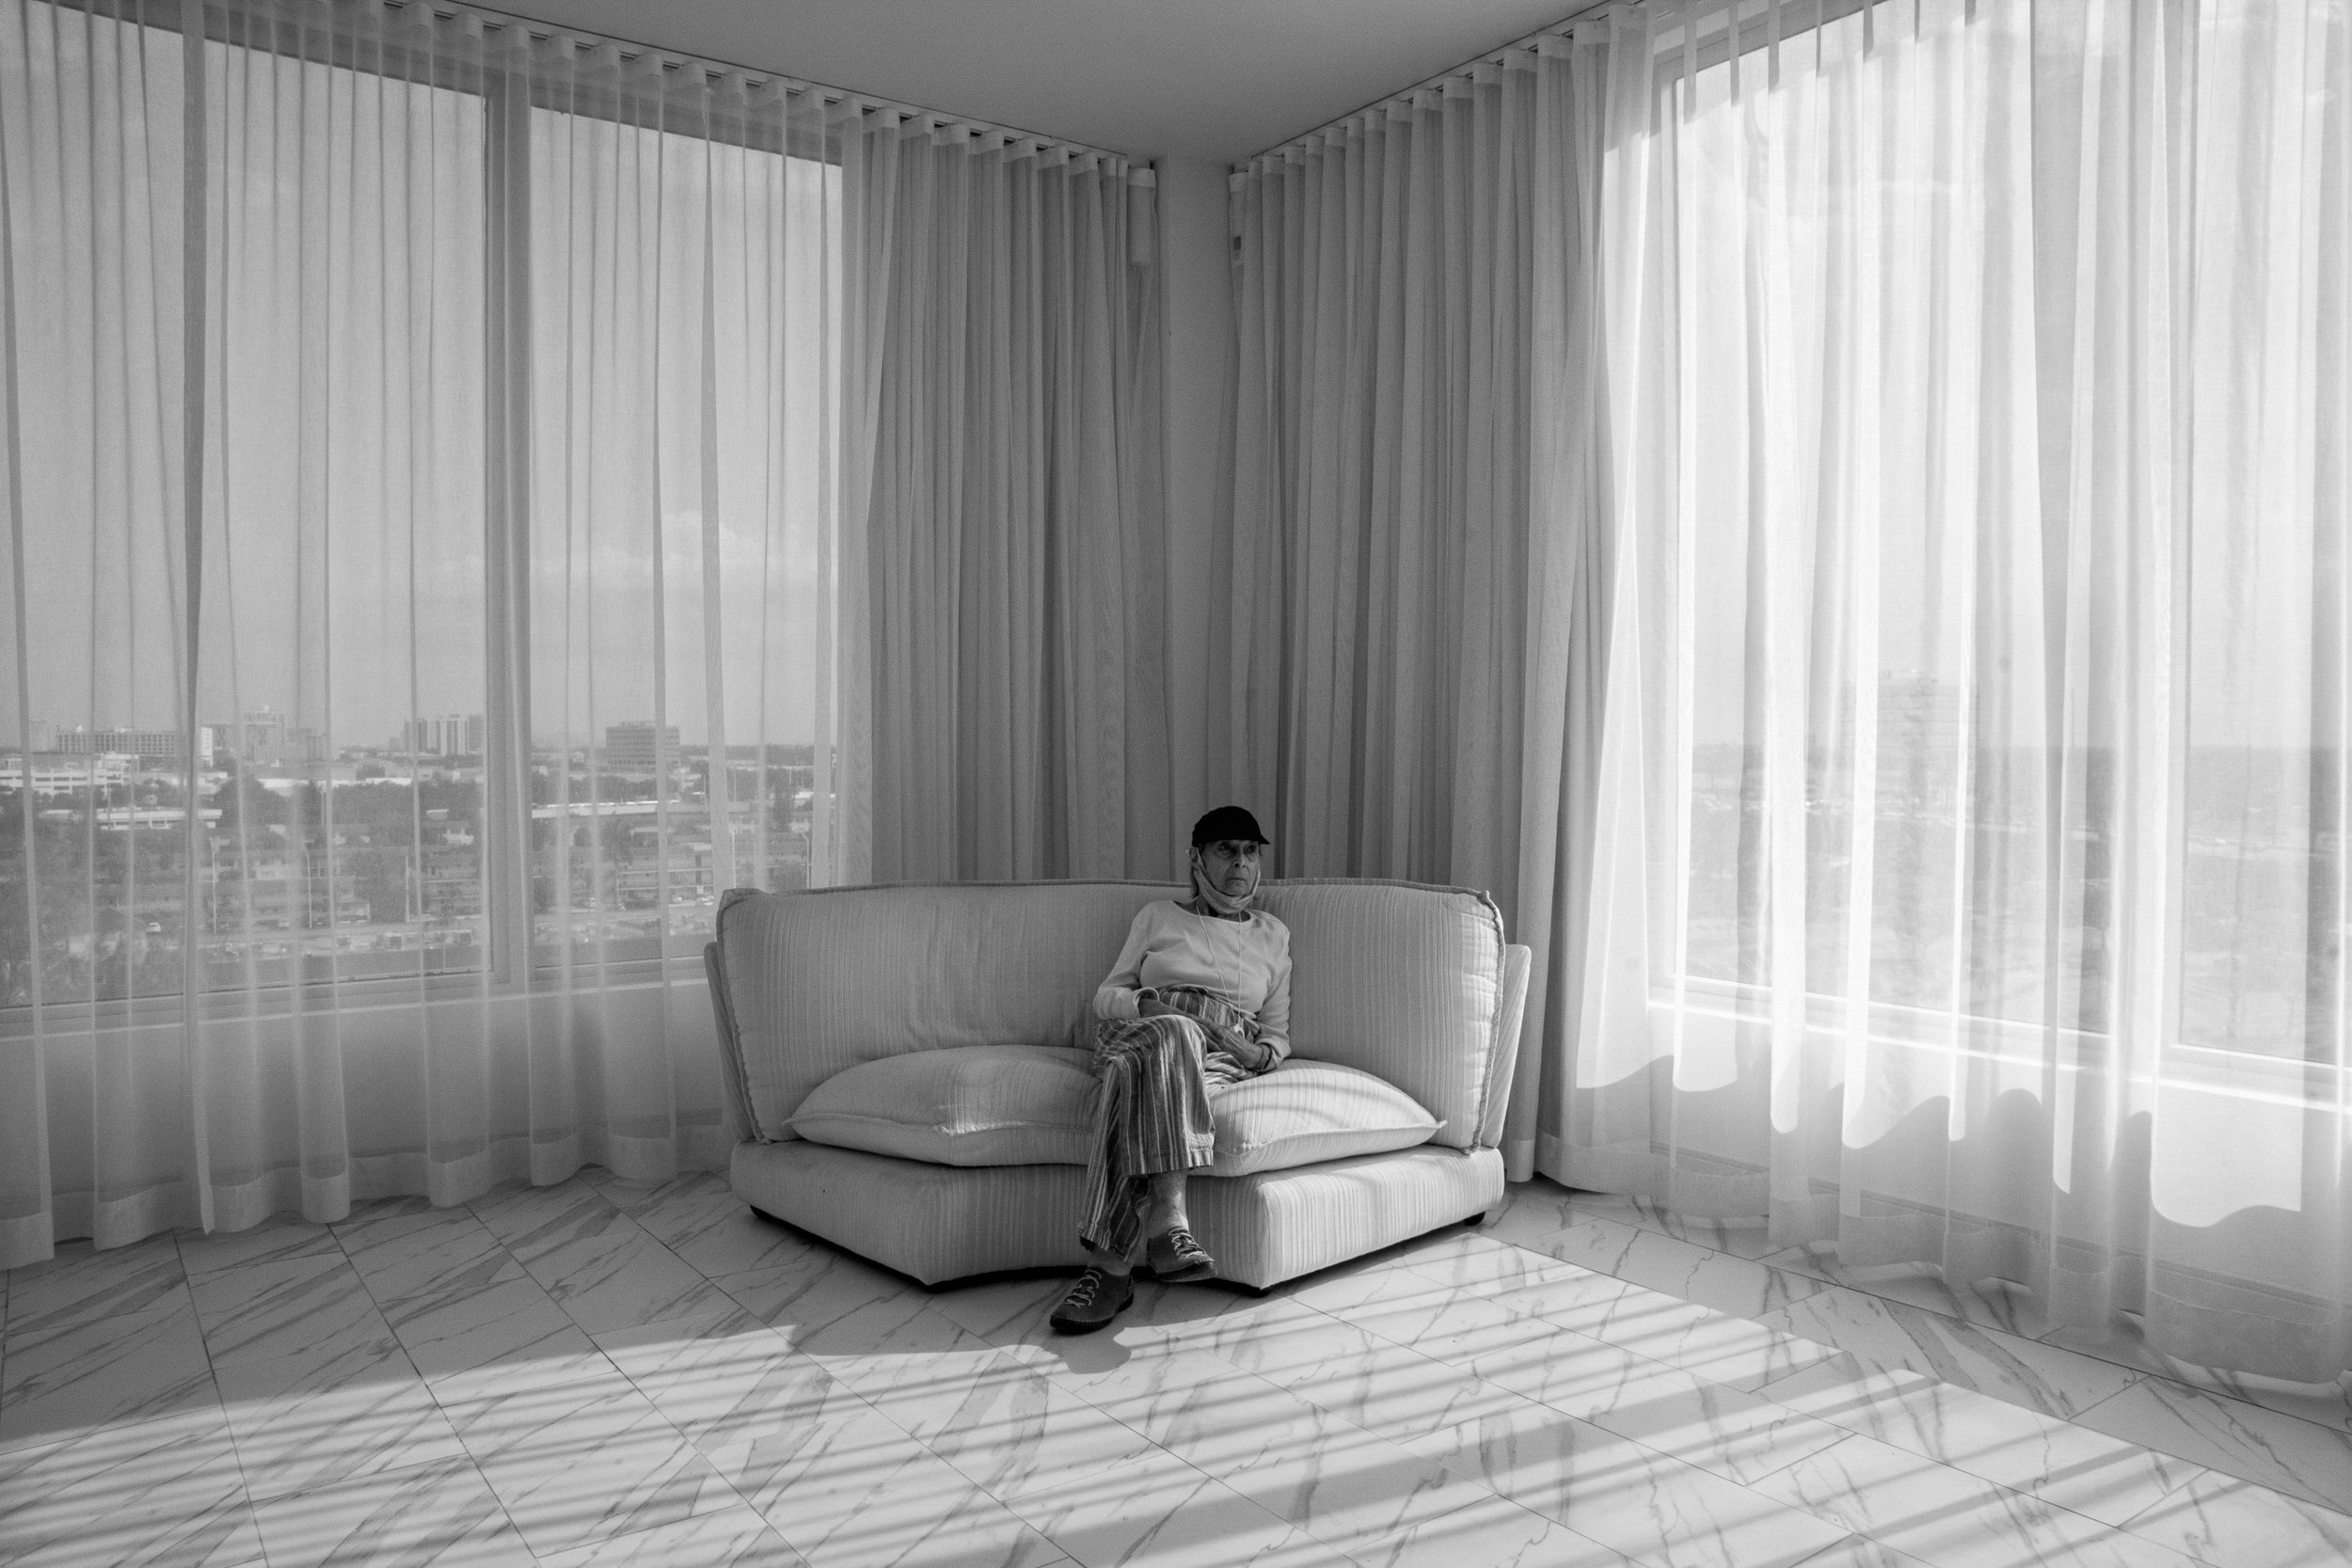  Audrey waits for the movers on her first day in assisted living. The Plaza at Park Square, Aventura, Florida. May 27, 2020 